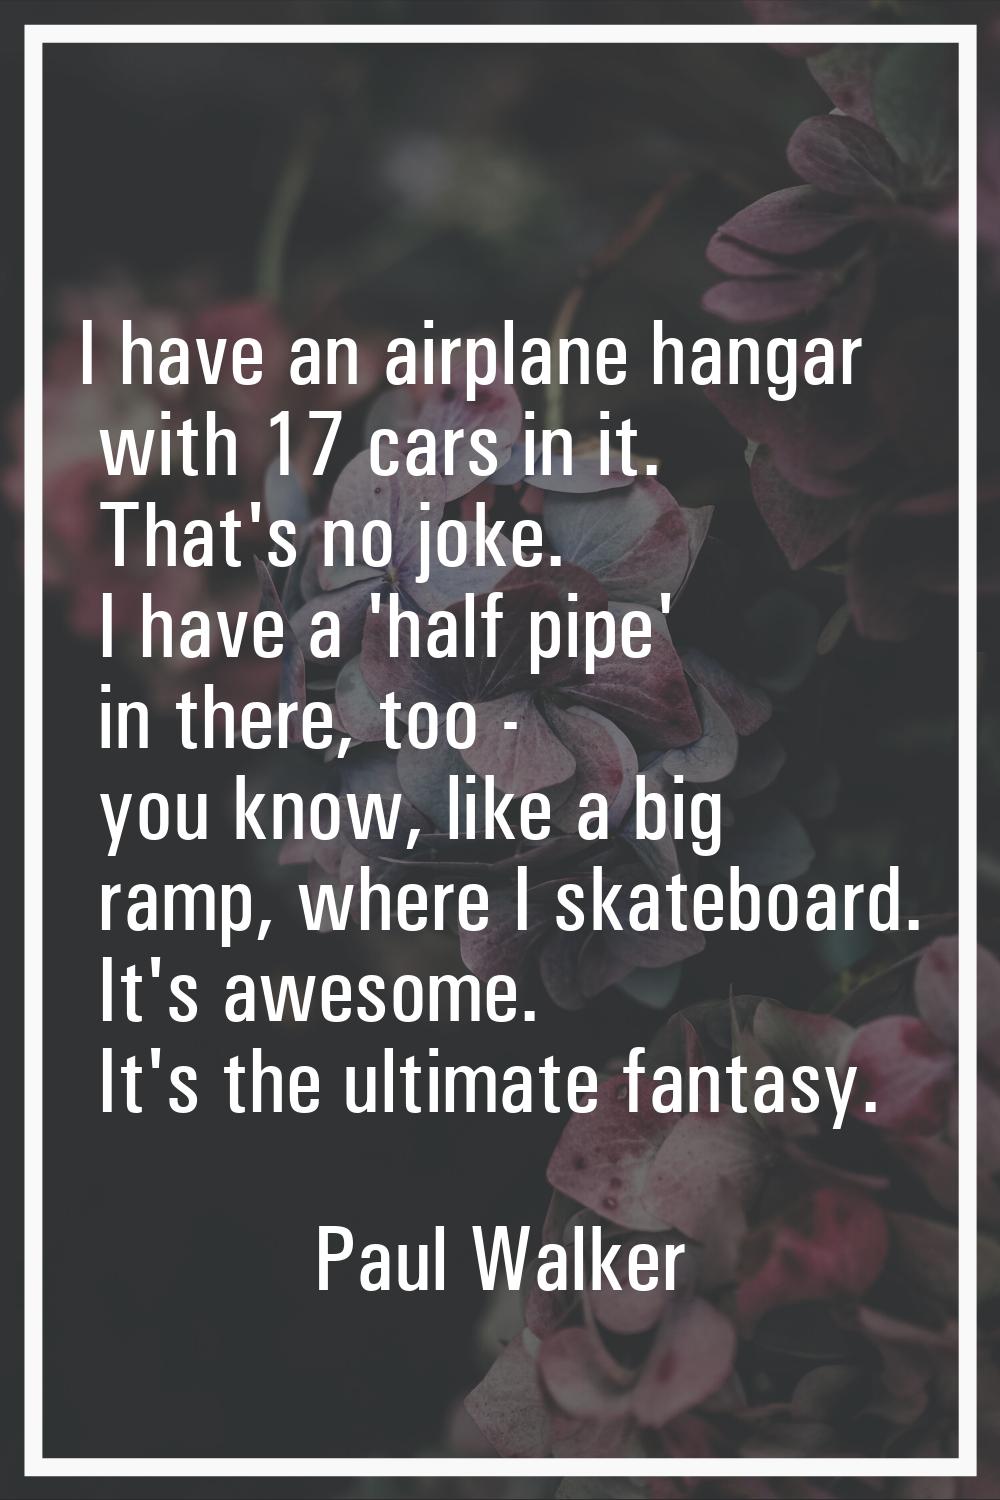 I have an airplane hangar with 17 cars in it. That's no joke. I have a 'half pipe' in there, too - 